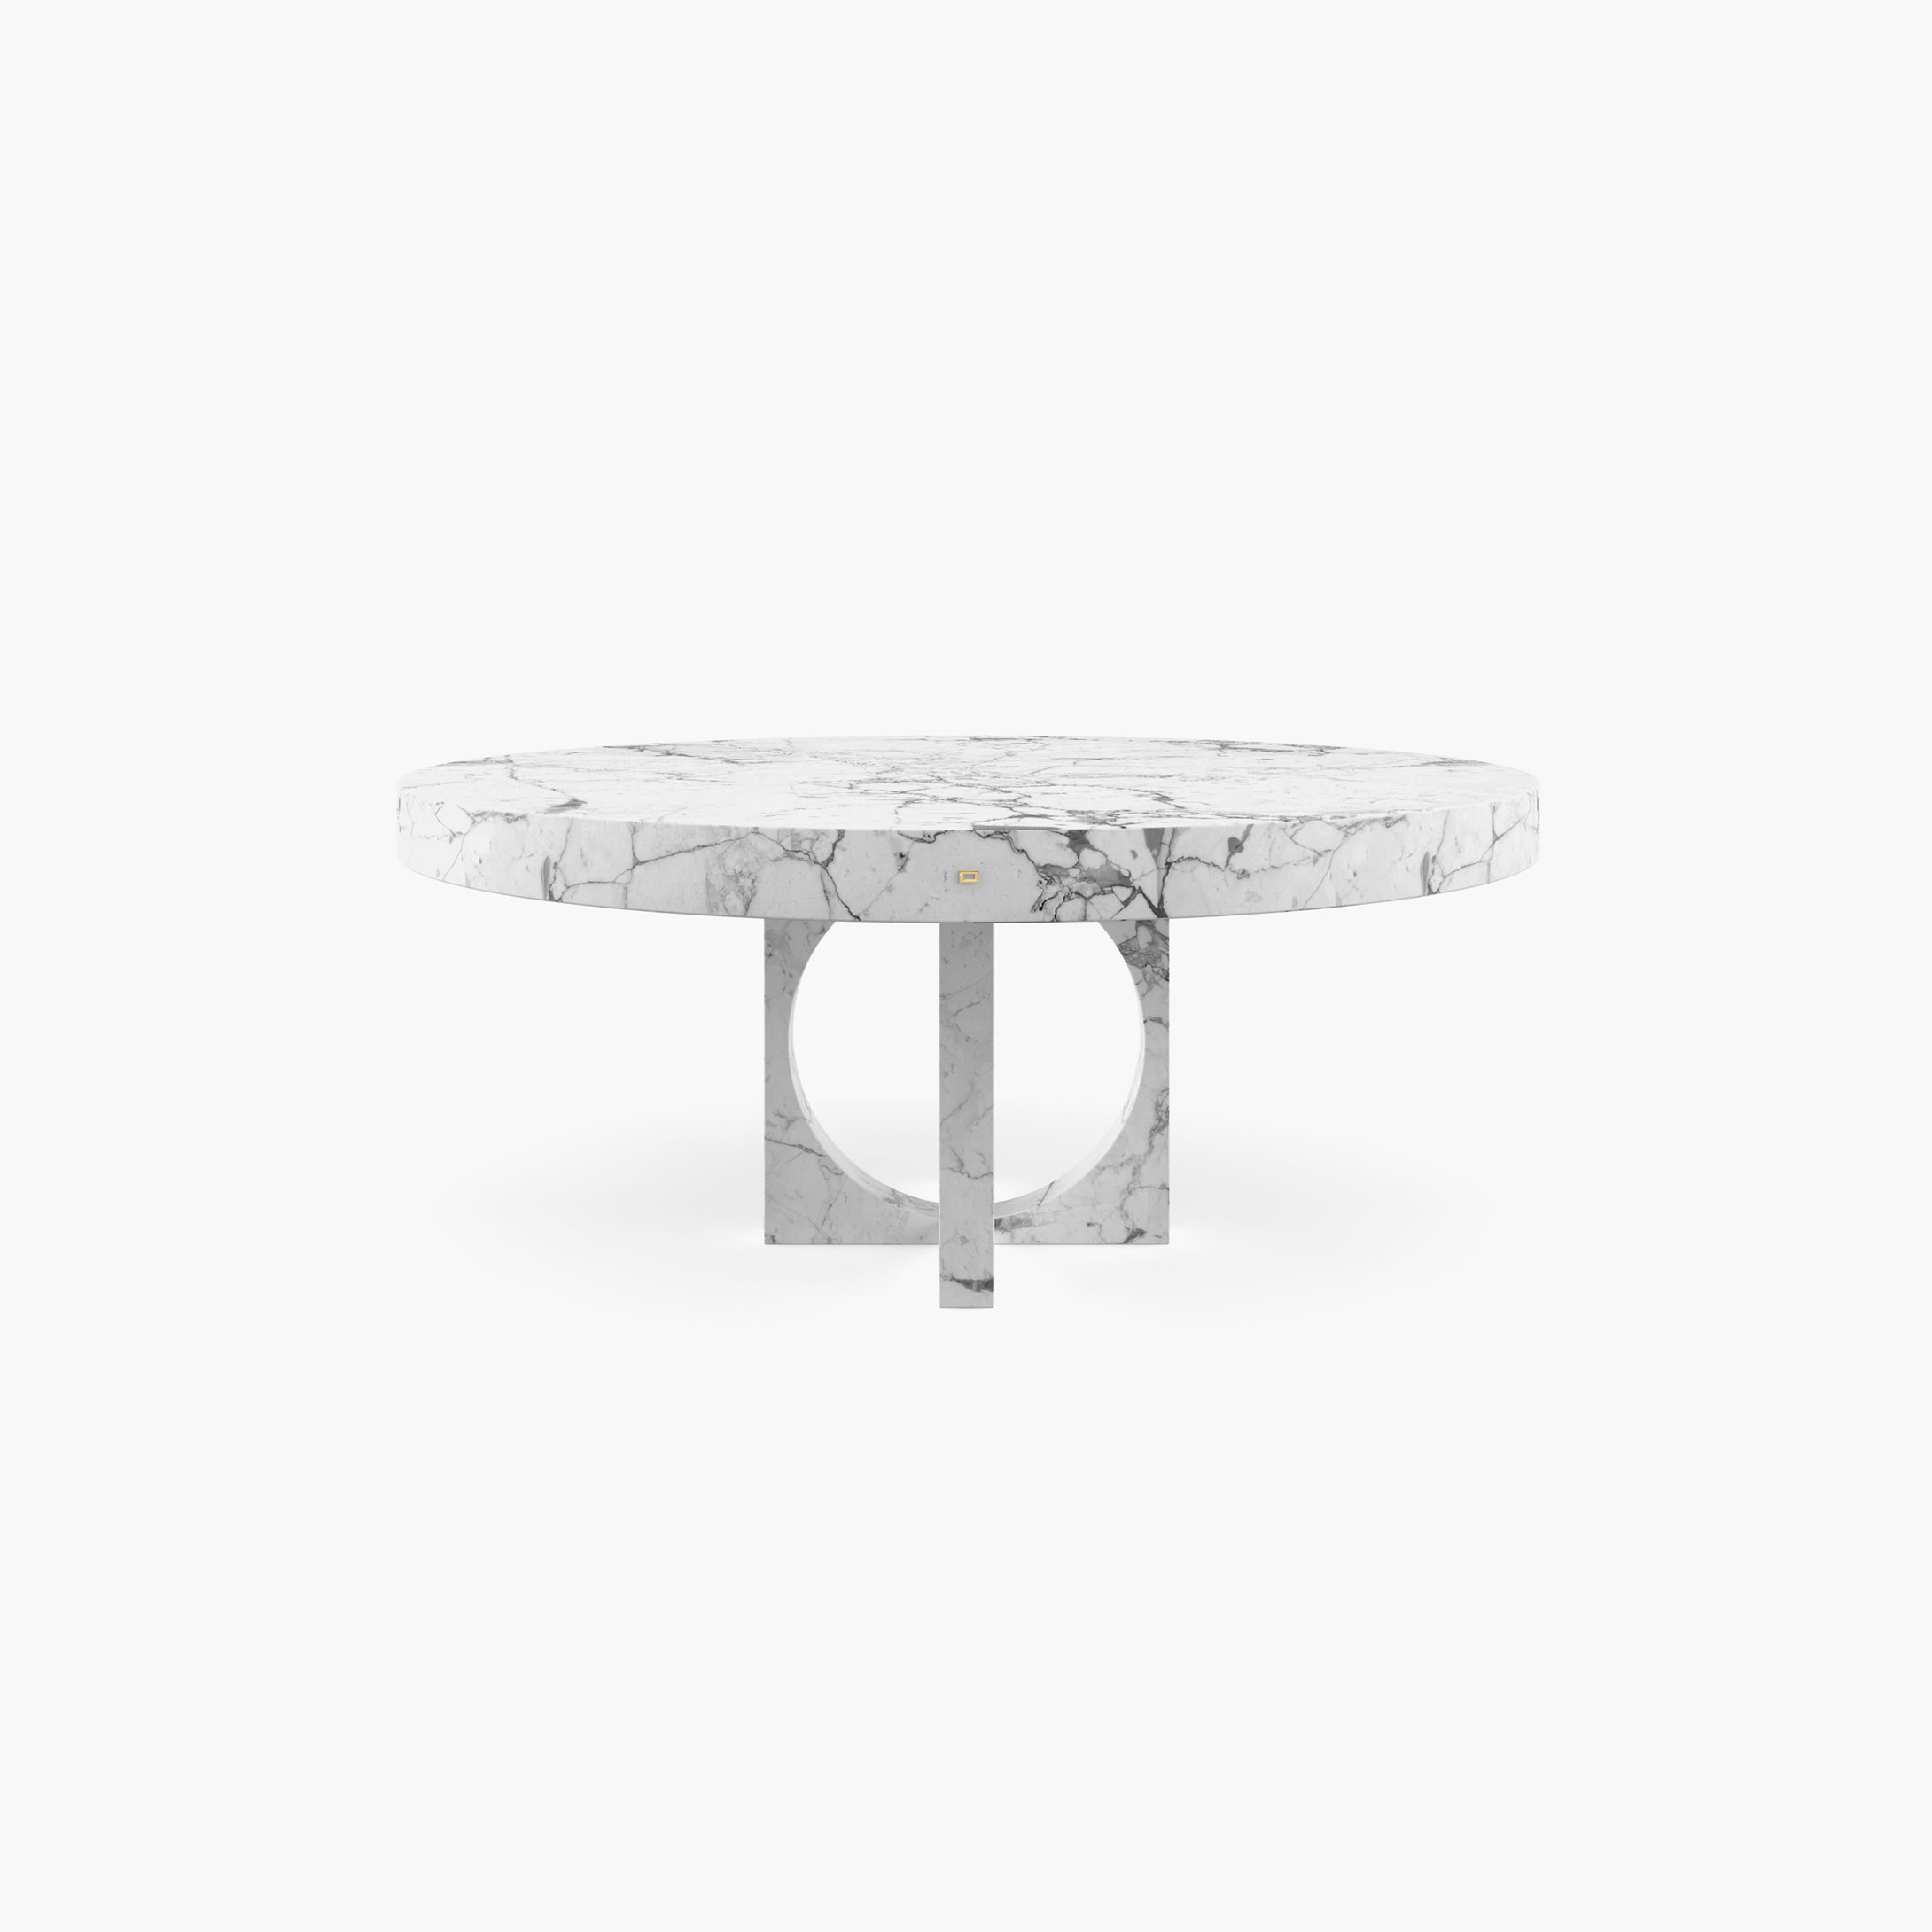 Dining Table round cylindrically perforated cuboid leg White Arabescato Marble avant gard Dining Room minimalism Dining Tables FS 194 C FELIX SCHWAKE